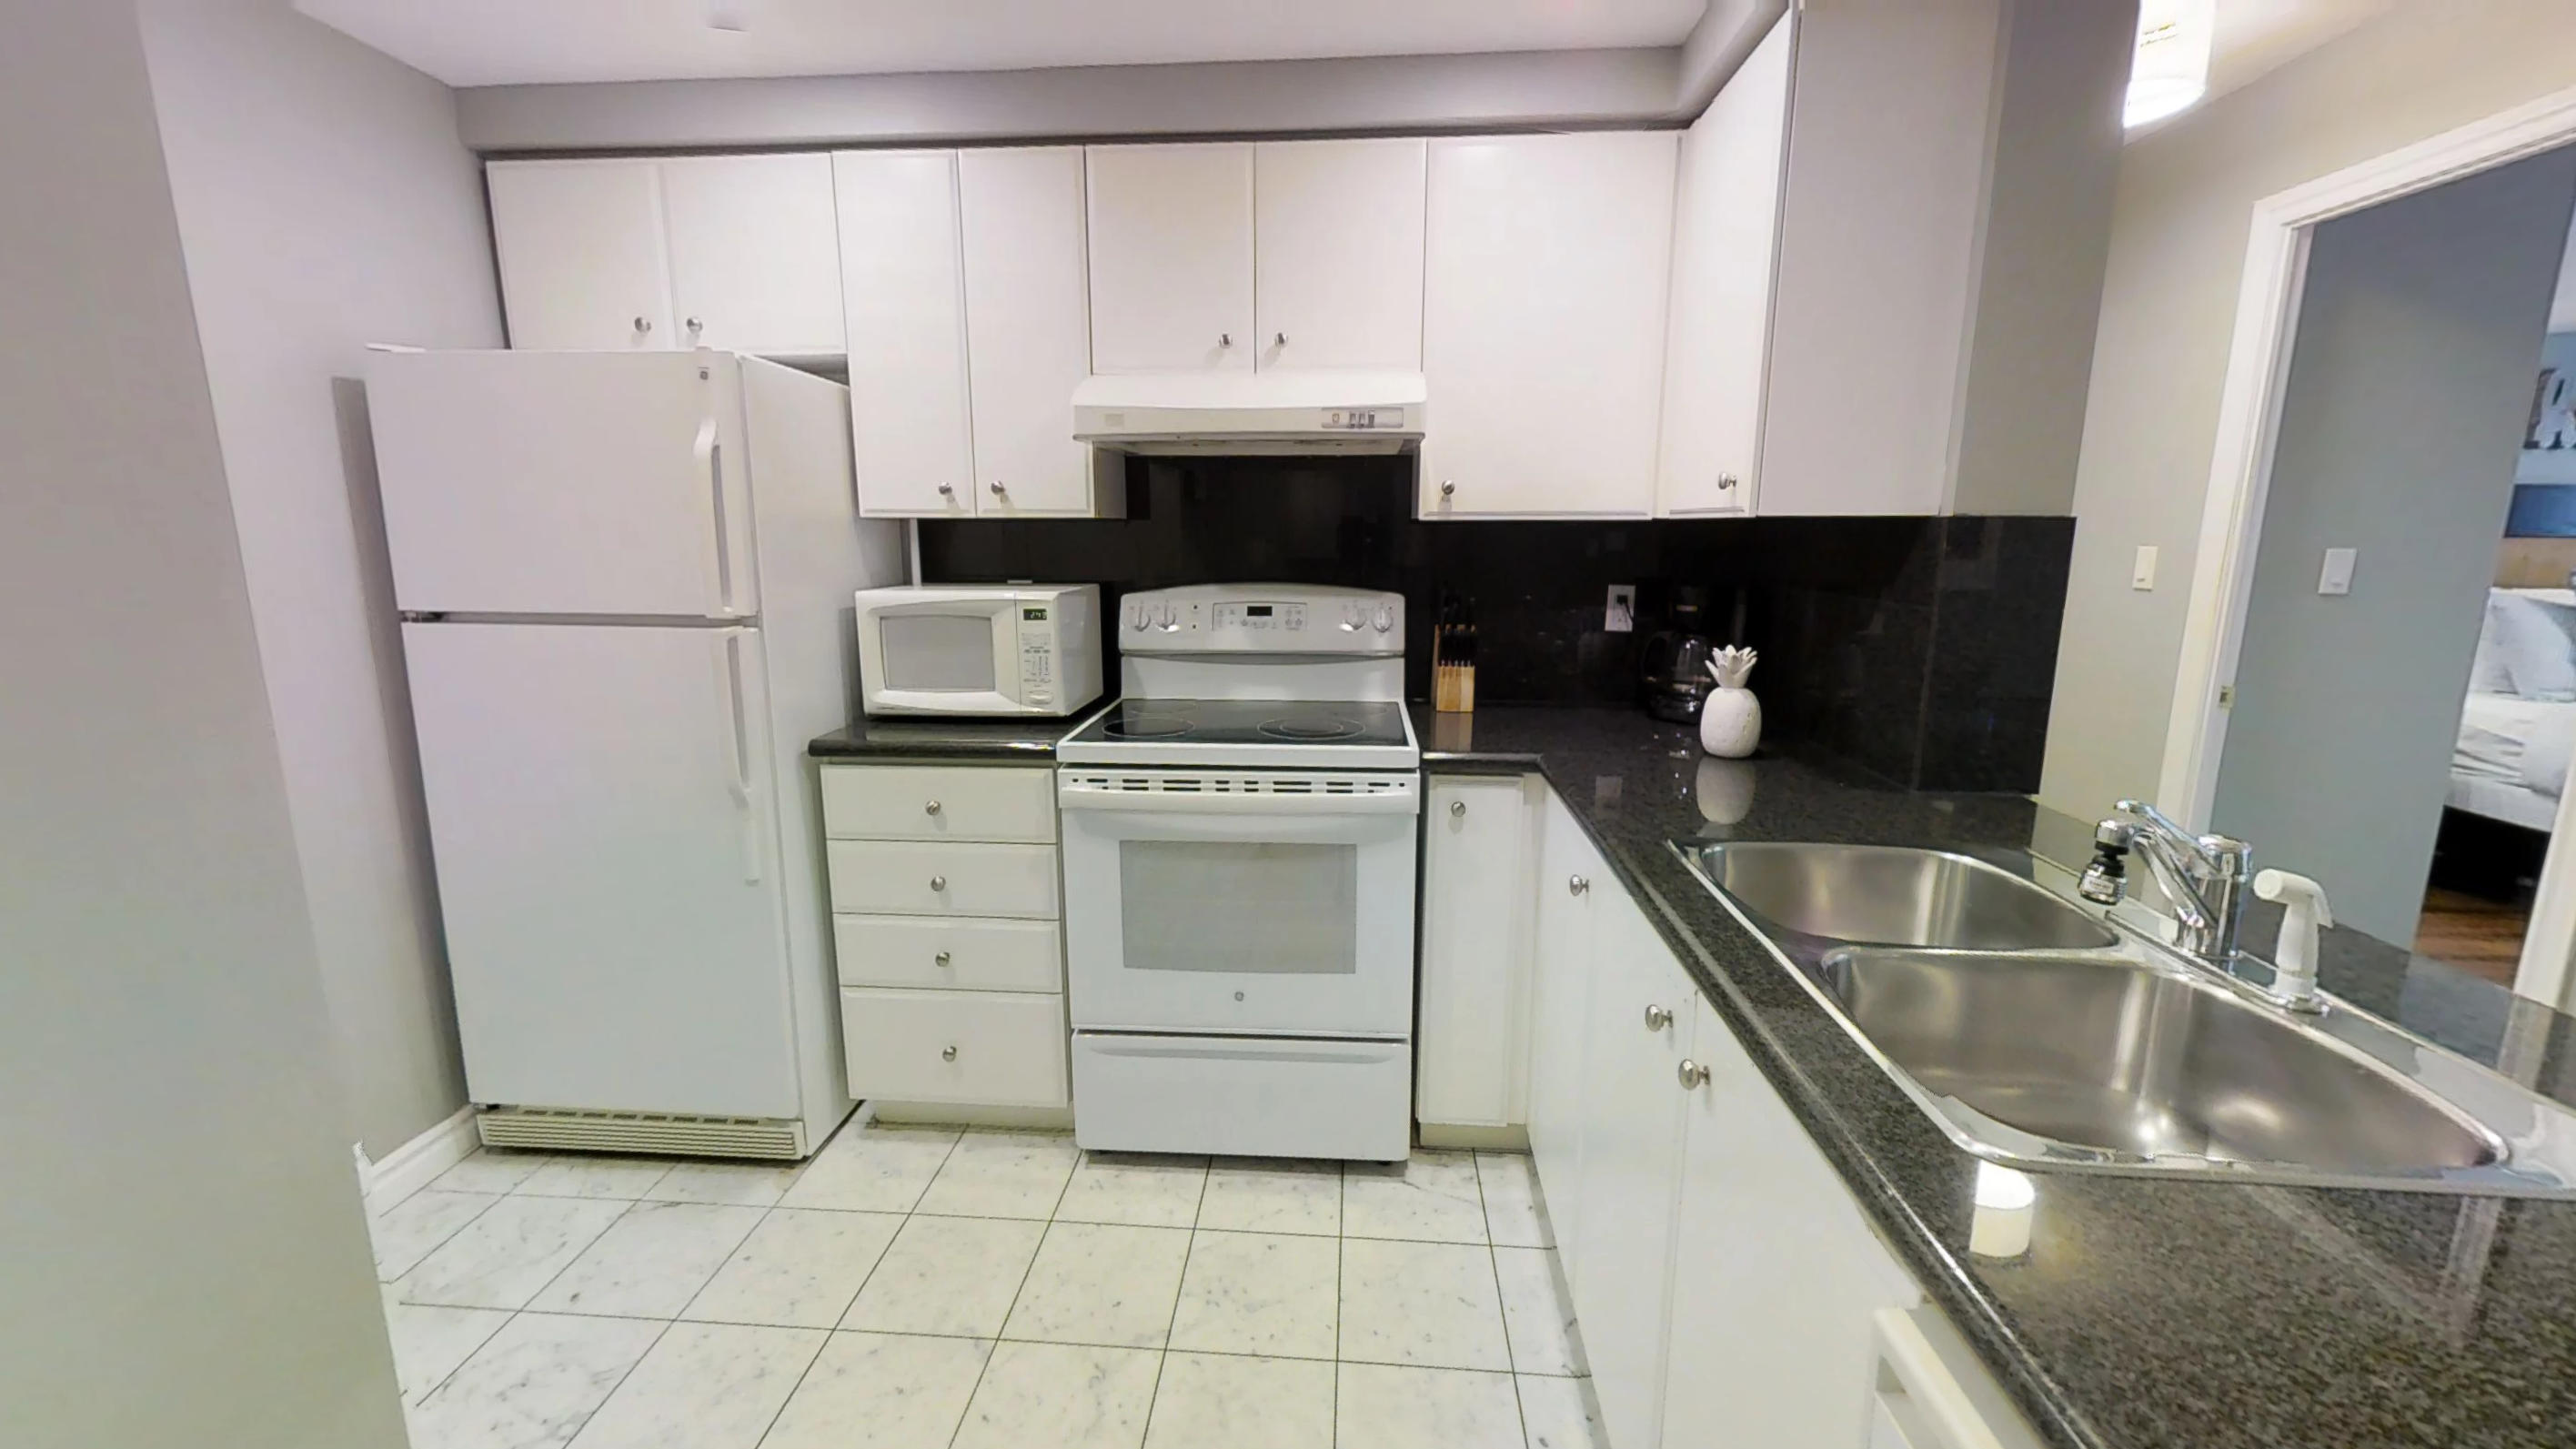 The fully furnished kitchen in a Qwest condominium, furnished by Sky View Suites in downtown Toronto.